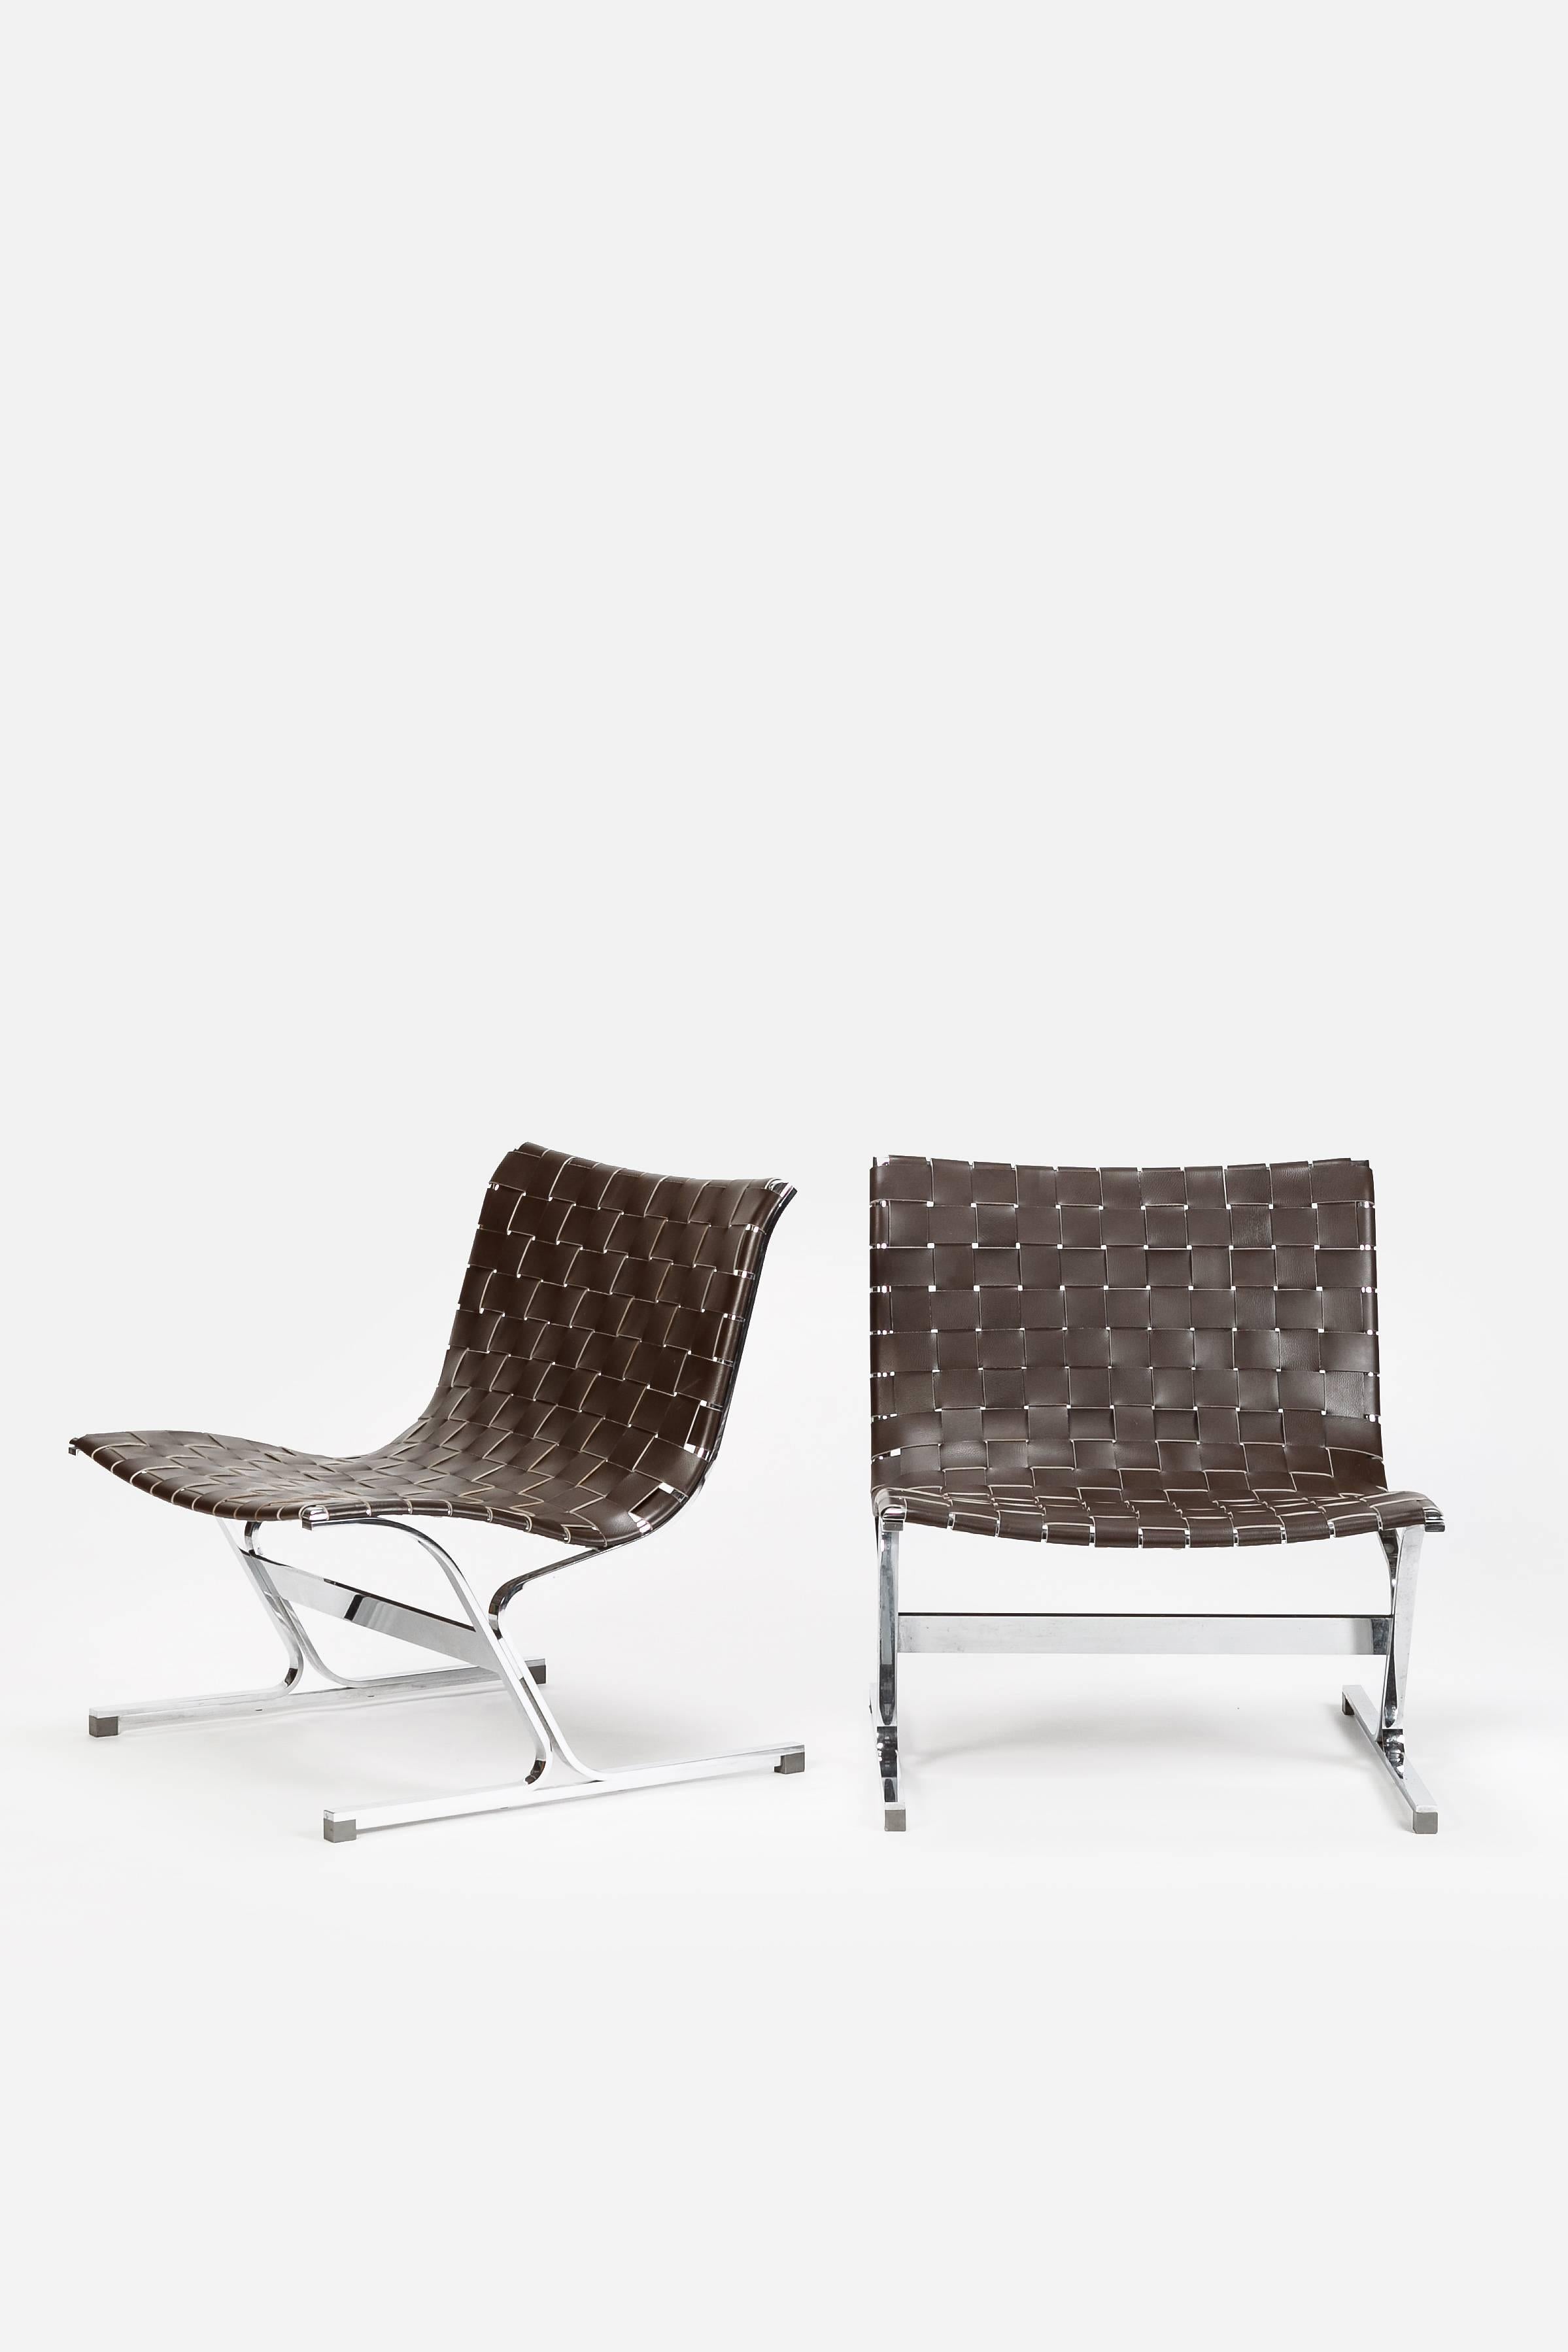 Unique pair of lounge chairs by Ross Littell for ICF, Milano, Italy. New dark brown interwoven saddle leather that is fixed to a steel frame with a chrome finish.